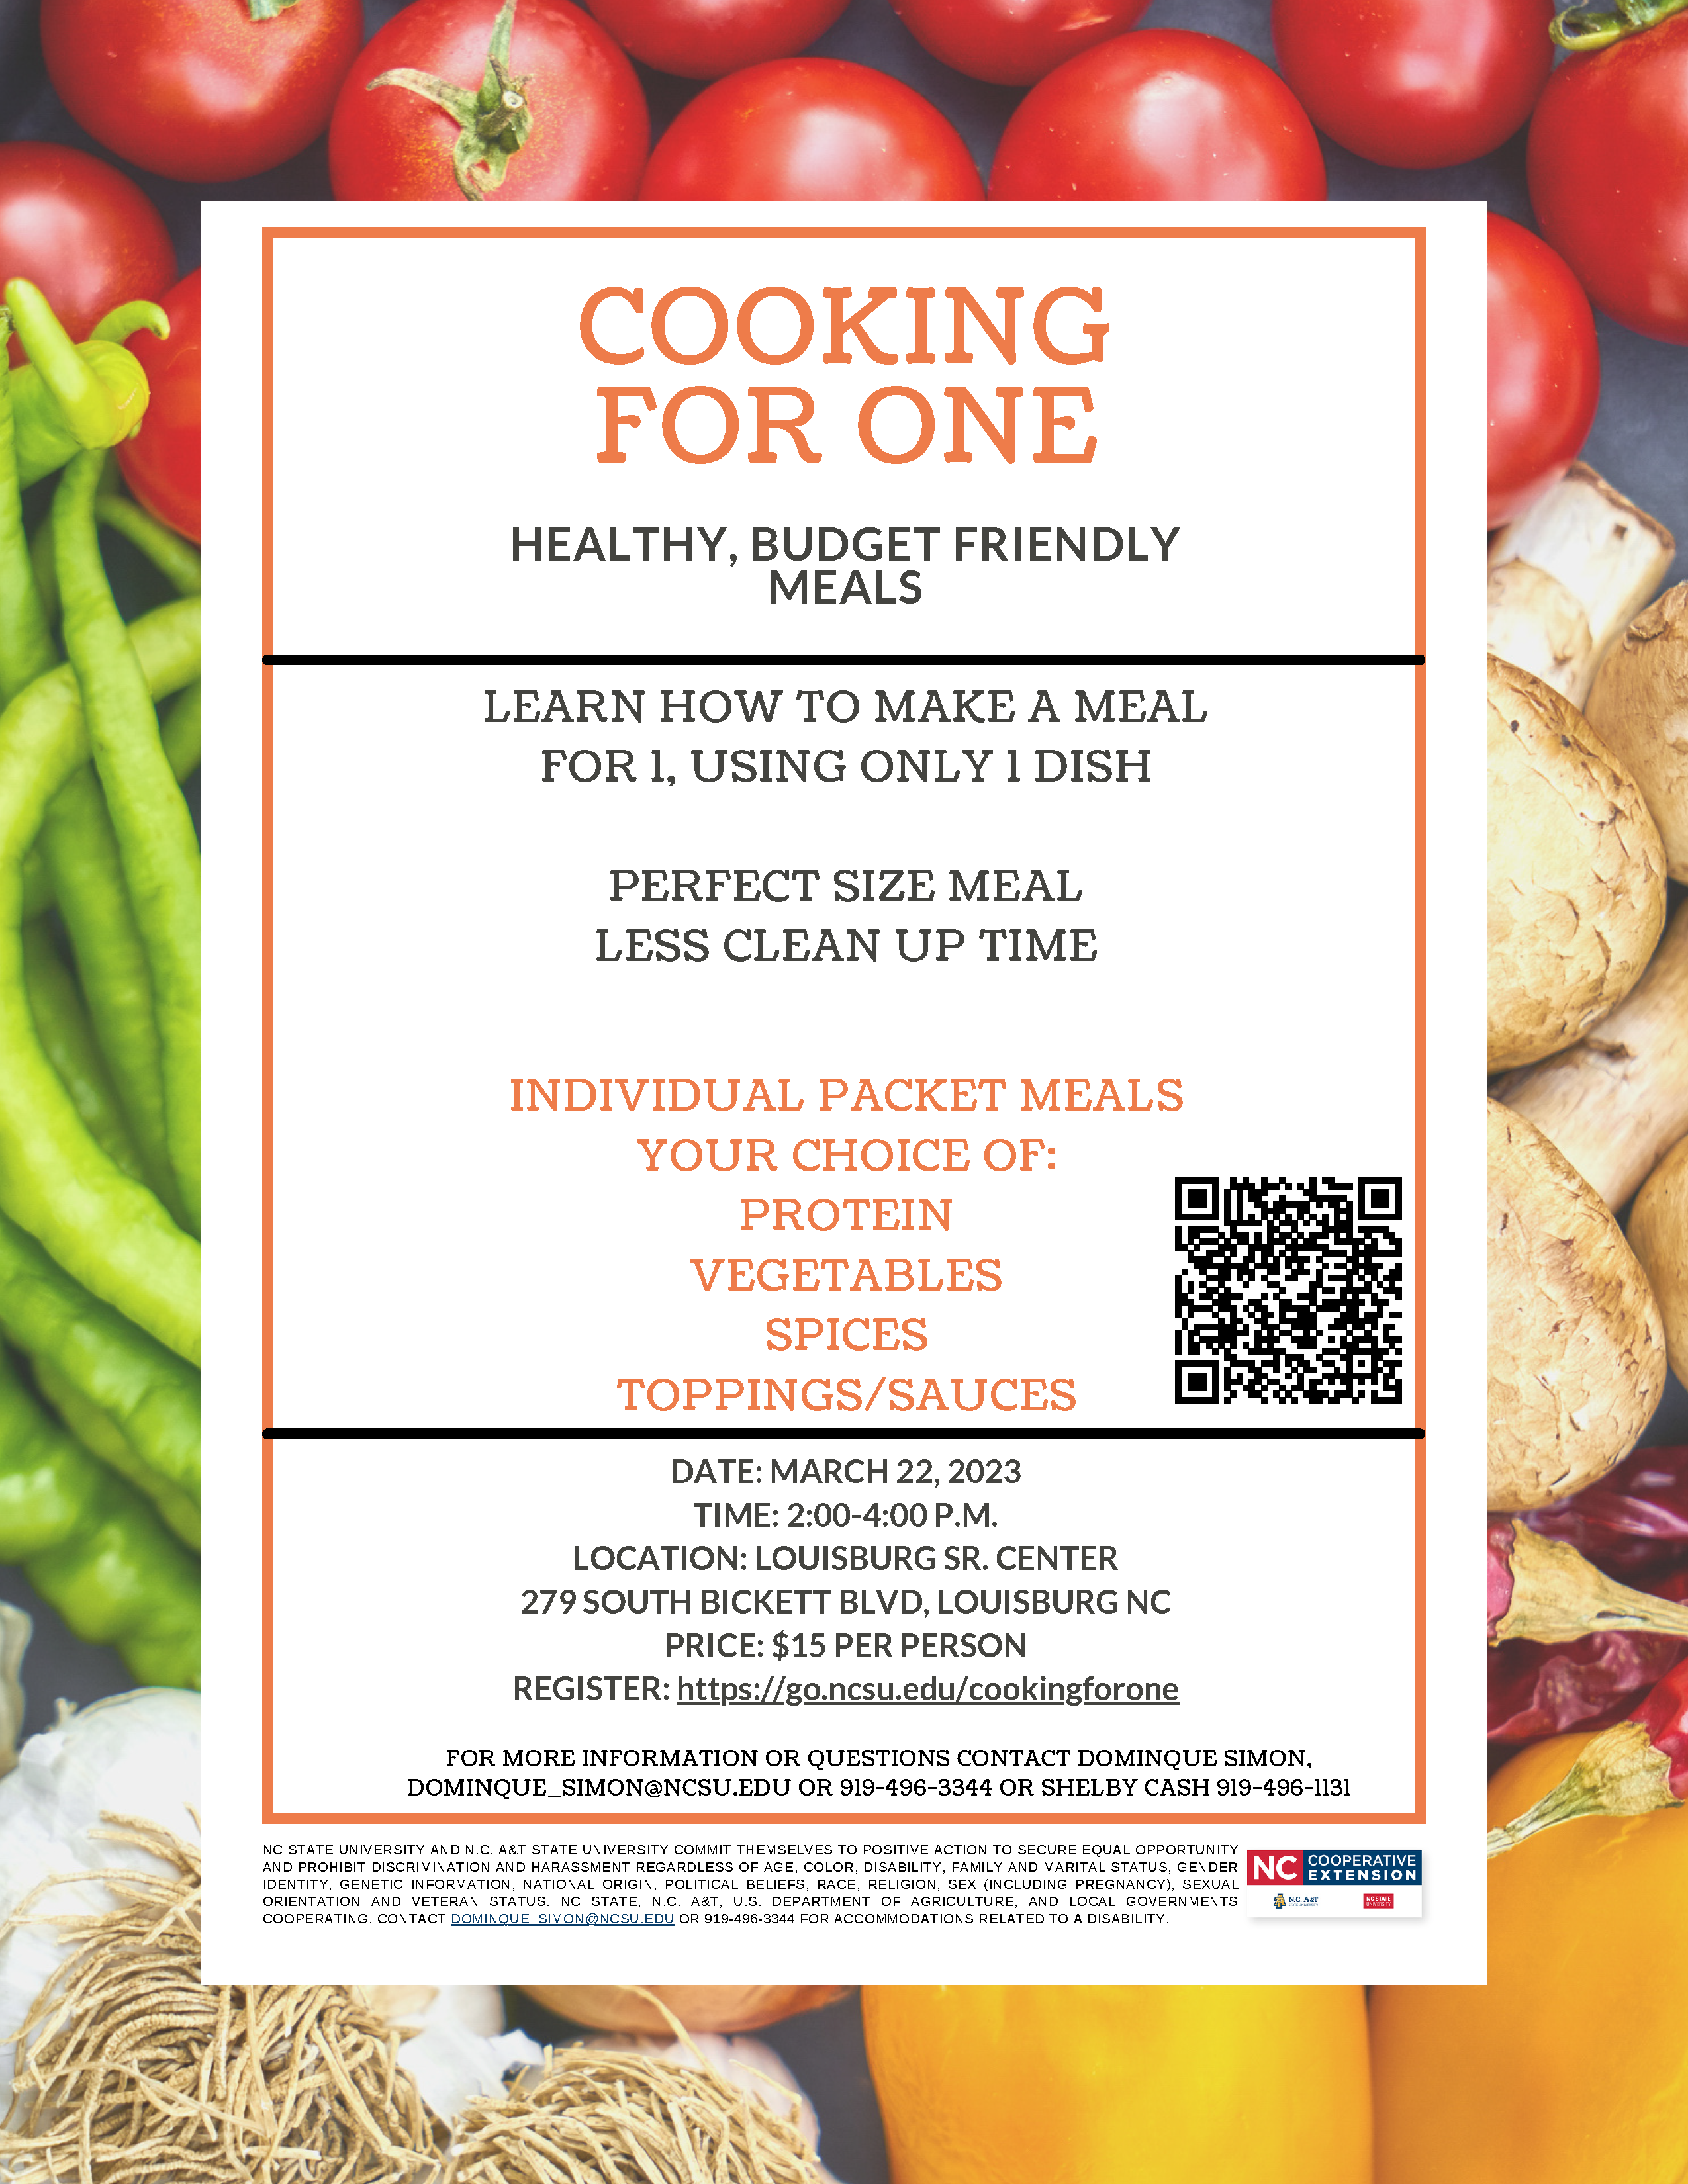 Cooking for One Cooking Class flyer with registration, date, time and location info.